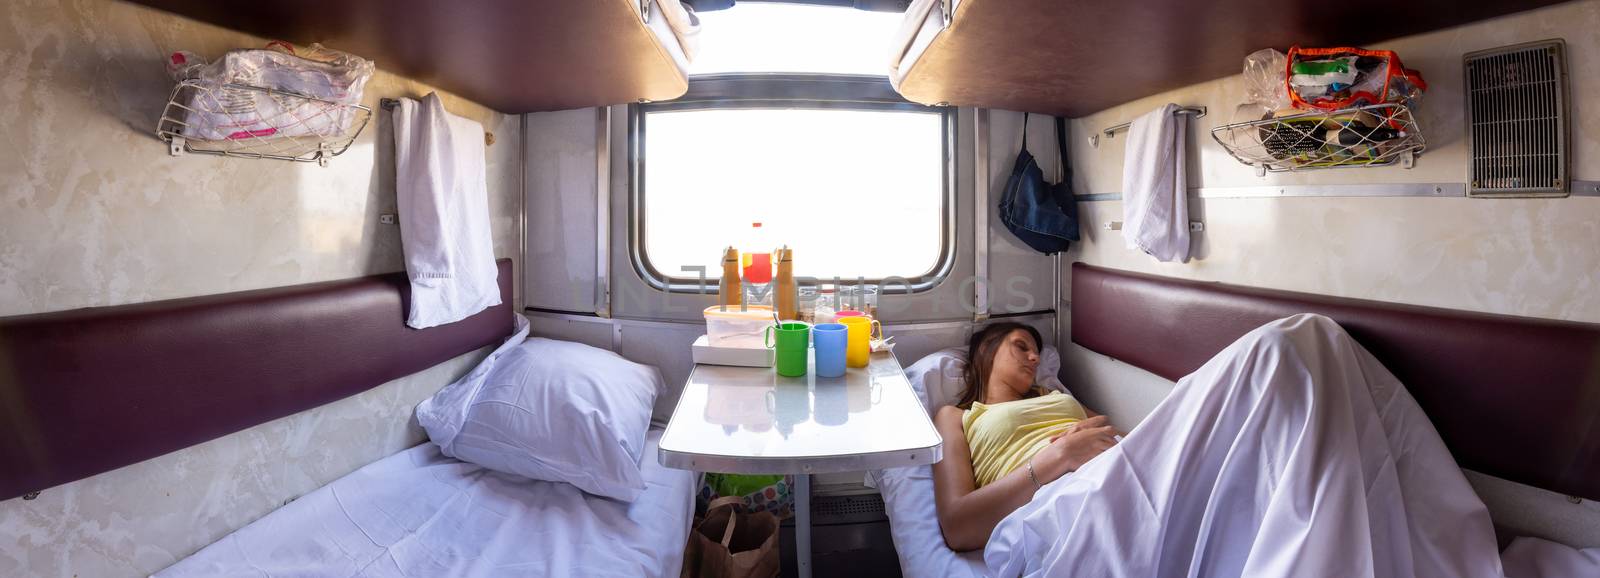 Panorama of the interior of a reserved seat train car, a girl sleeping on one of the lower shelves by Madhourse